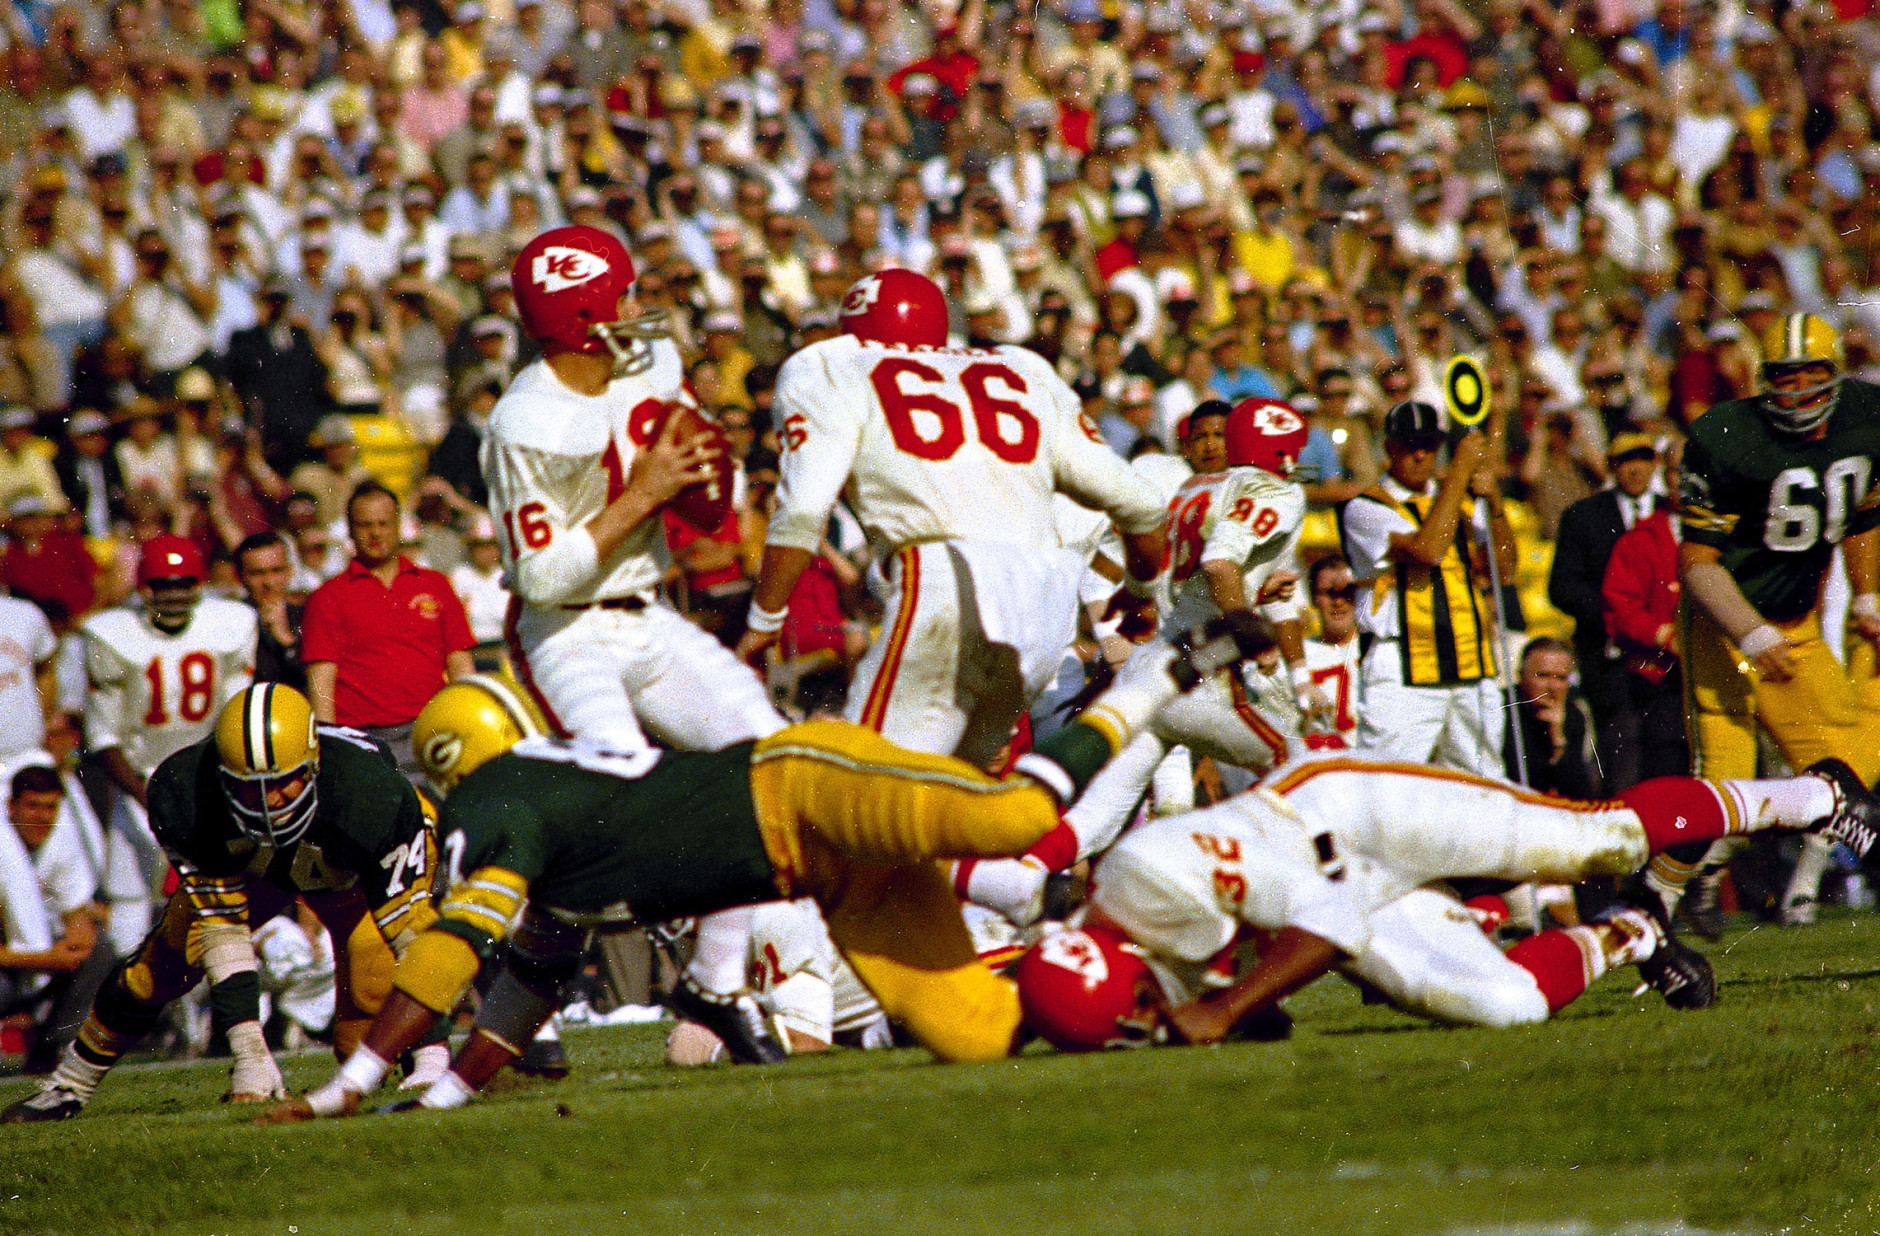 The Green Bay Packers beat Len Dawson (16) and the Kansas City Chiefs in the inaugural Super Bowl, played at the Los Angeles Coliseum in 1967. (AP)